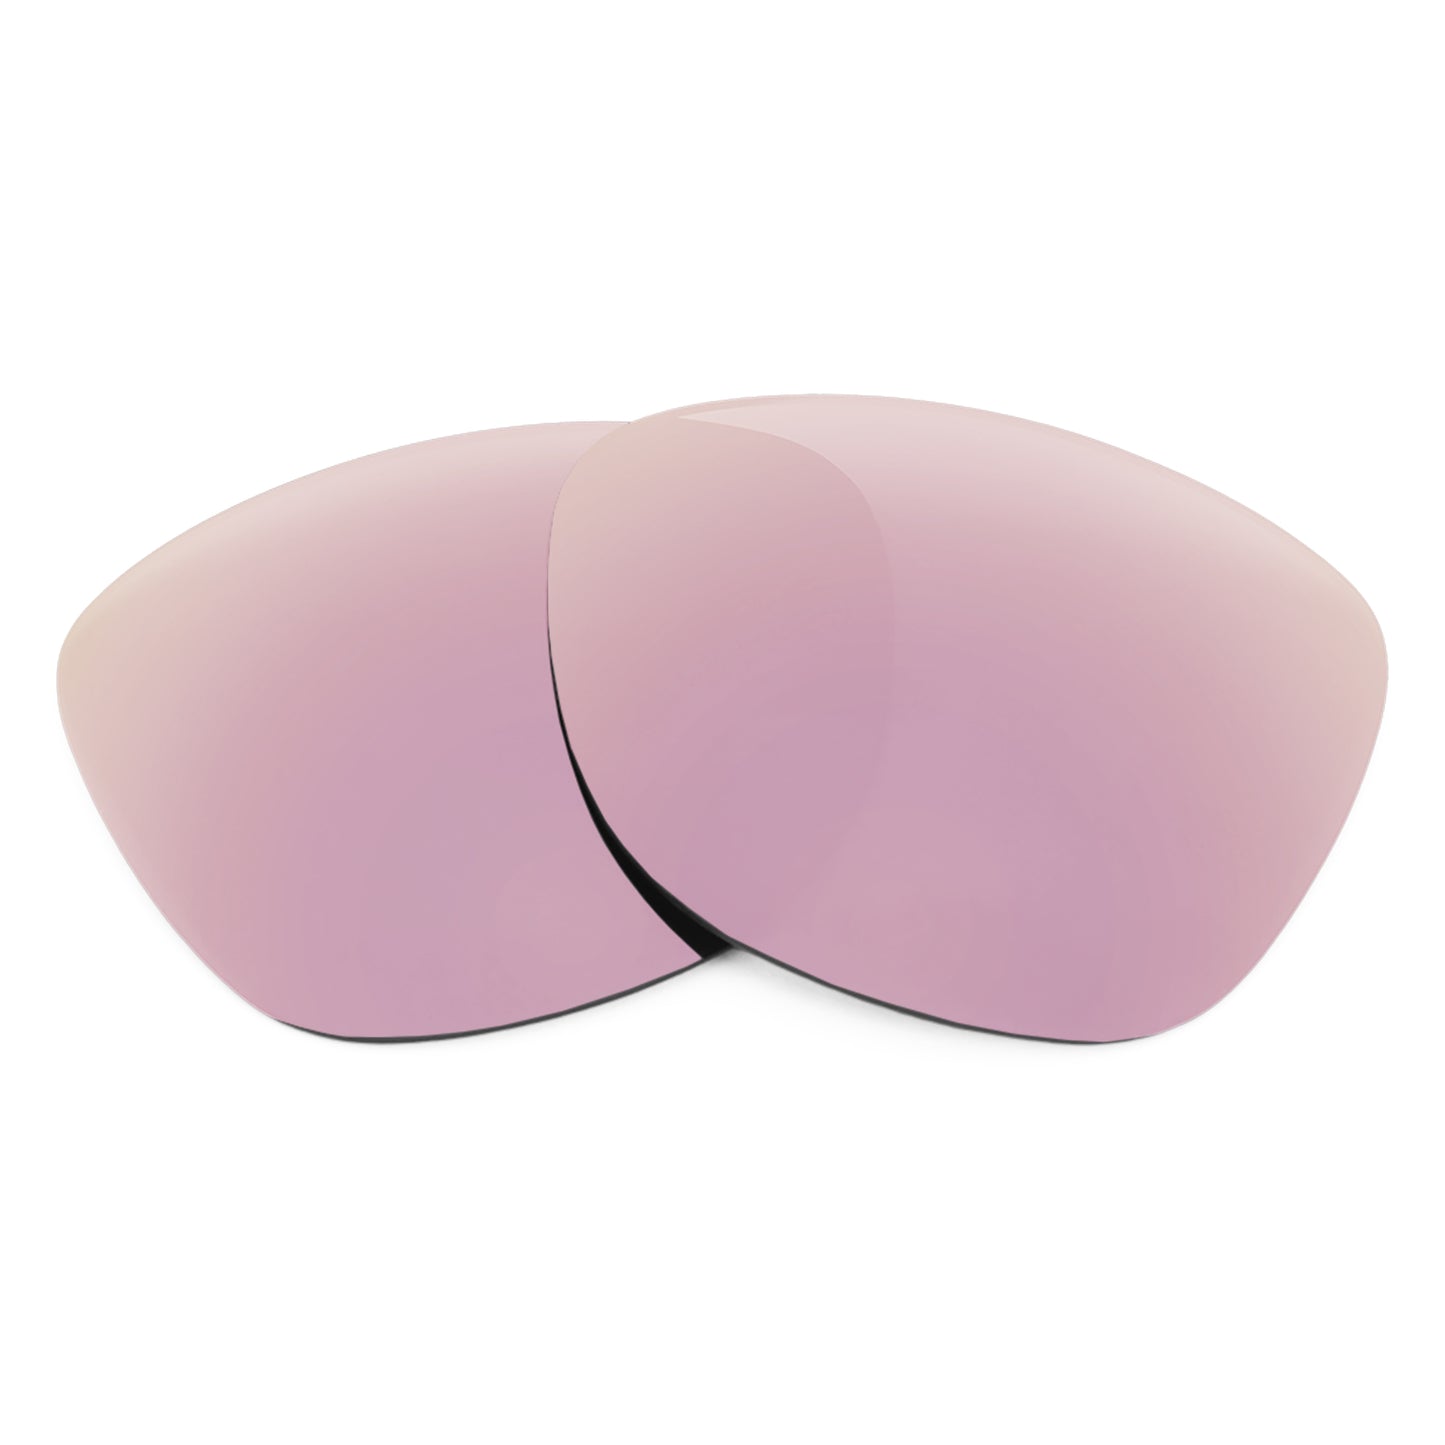 Revant replacement lenses for Ray-Ban Justin Classic RB4165 55mm Non-Polarized Rose Gold